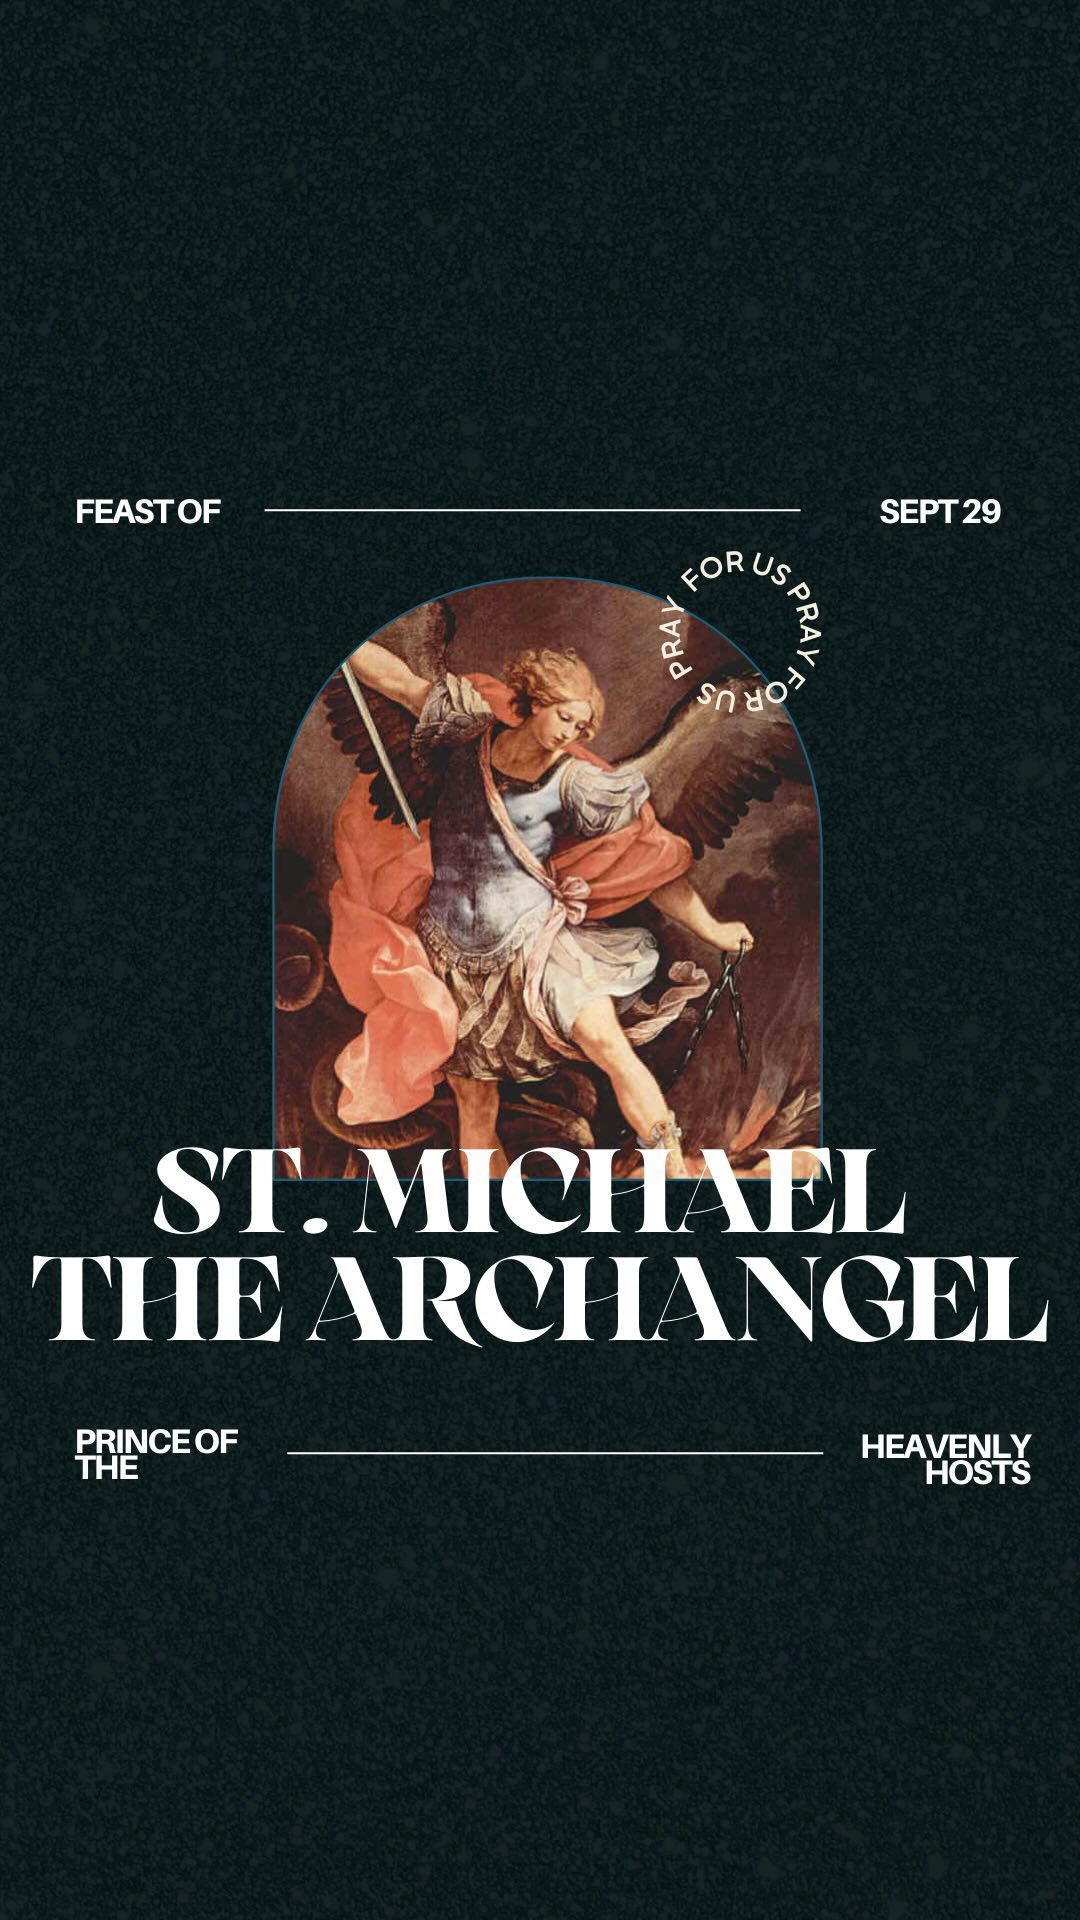 Happy Feast of St. Michael & the angels ! 

Have you prayed the St. Michael prayer before? 👇 

St. Michael, the archangel, 
Defend us in battle, be our protection against the wickedness and snares of the devil. 
May God rebuke him, we humble pray: and do thou, O Prince of the Heavenly Hosts, by the power of God, cast into hell satan and all the evil spirits who roam about the world seeking the ruins of souls. 
Amen. 

🙏